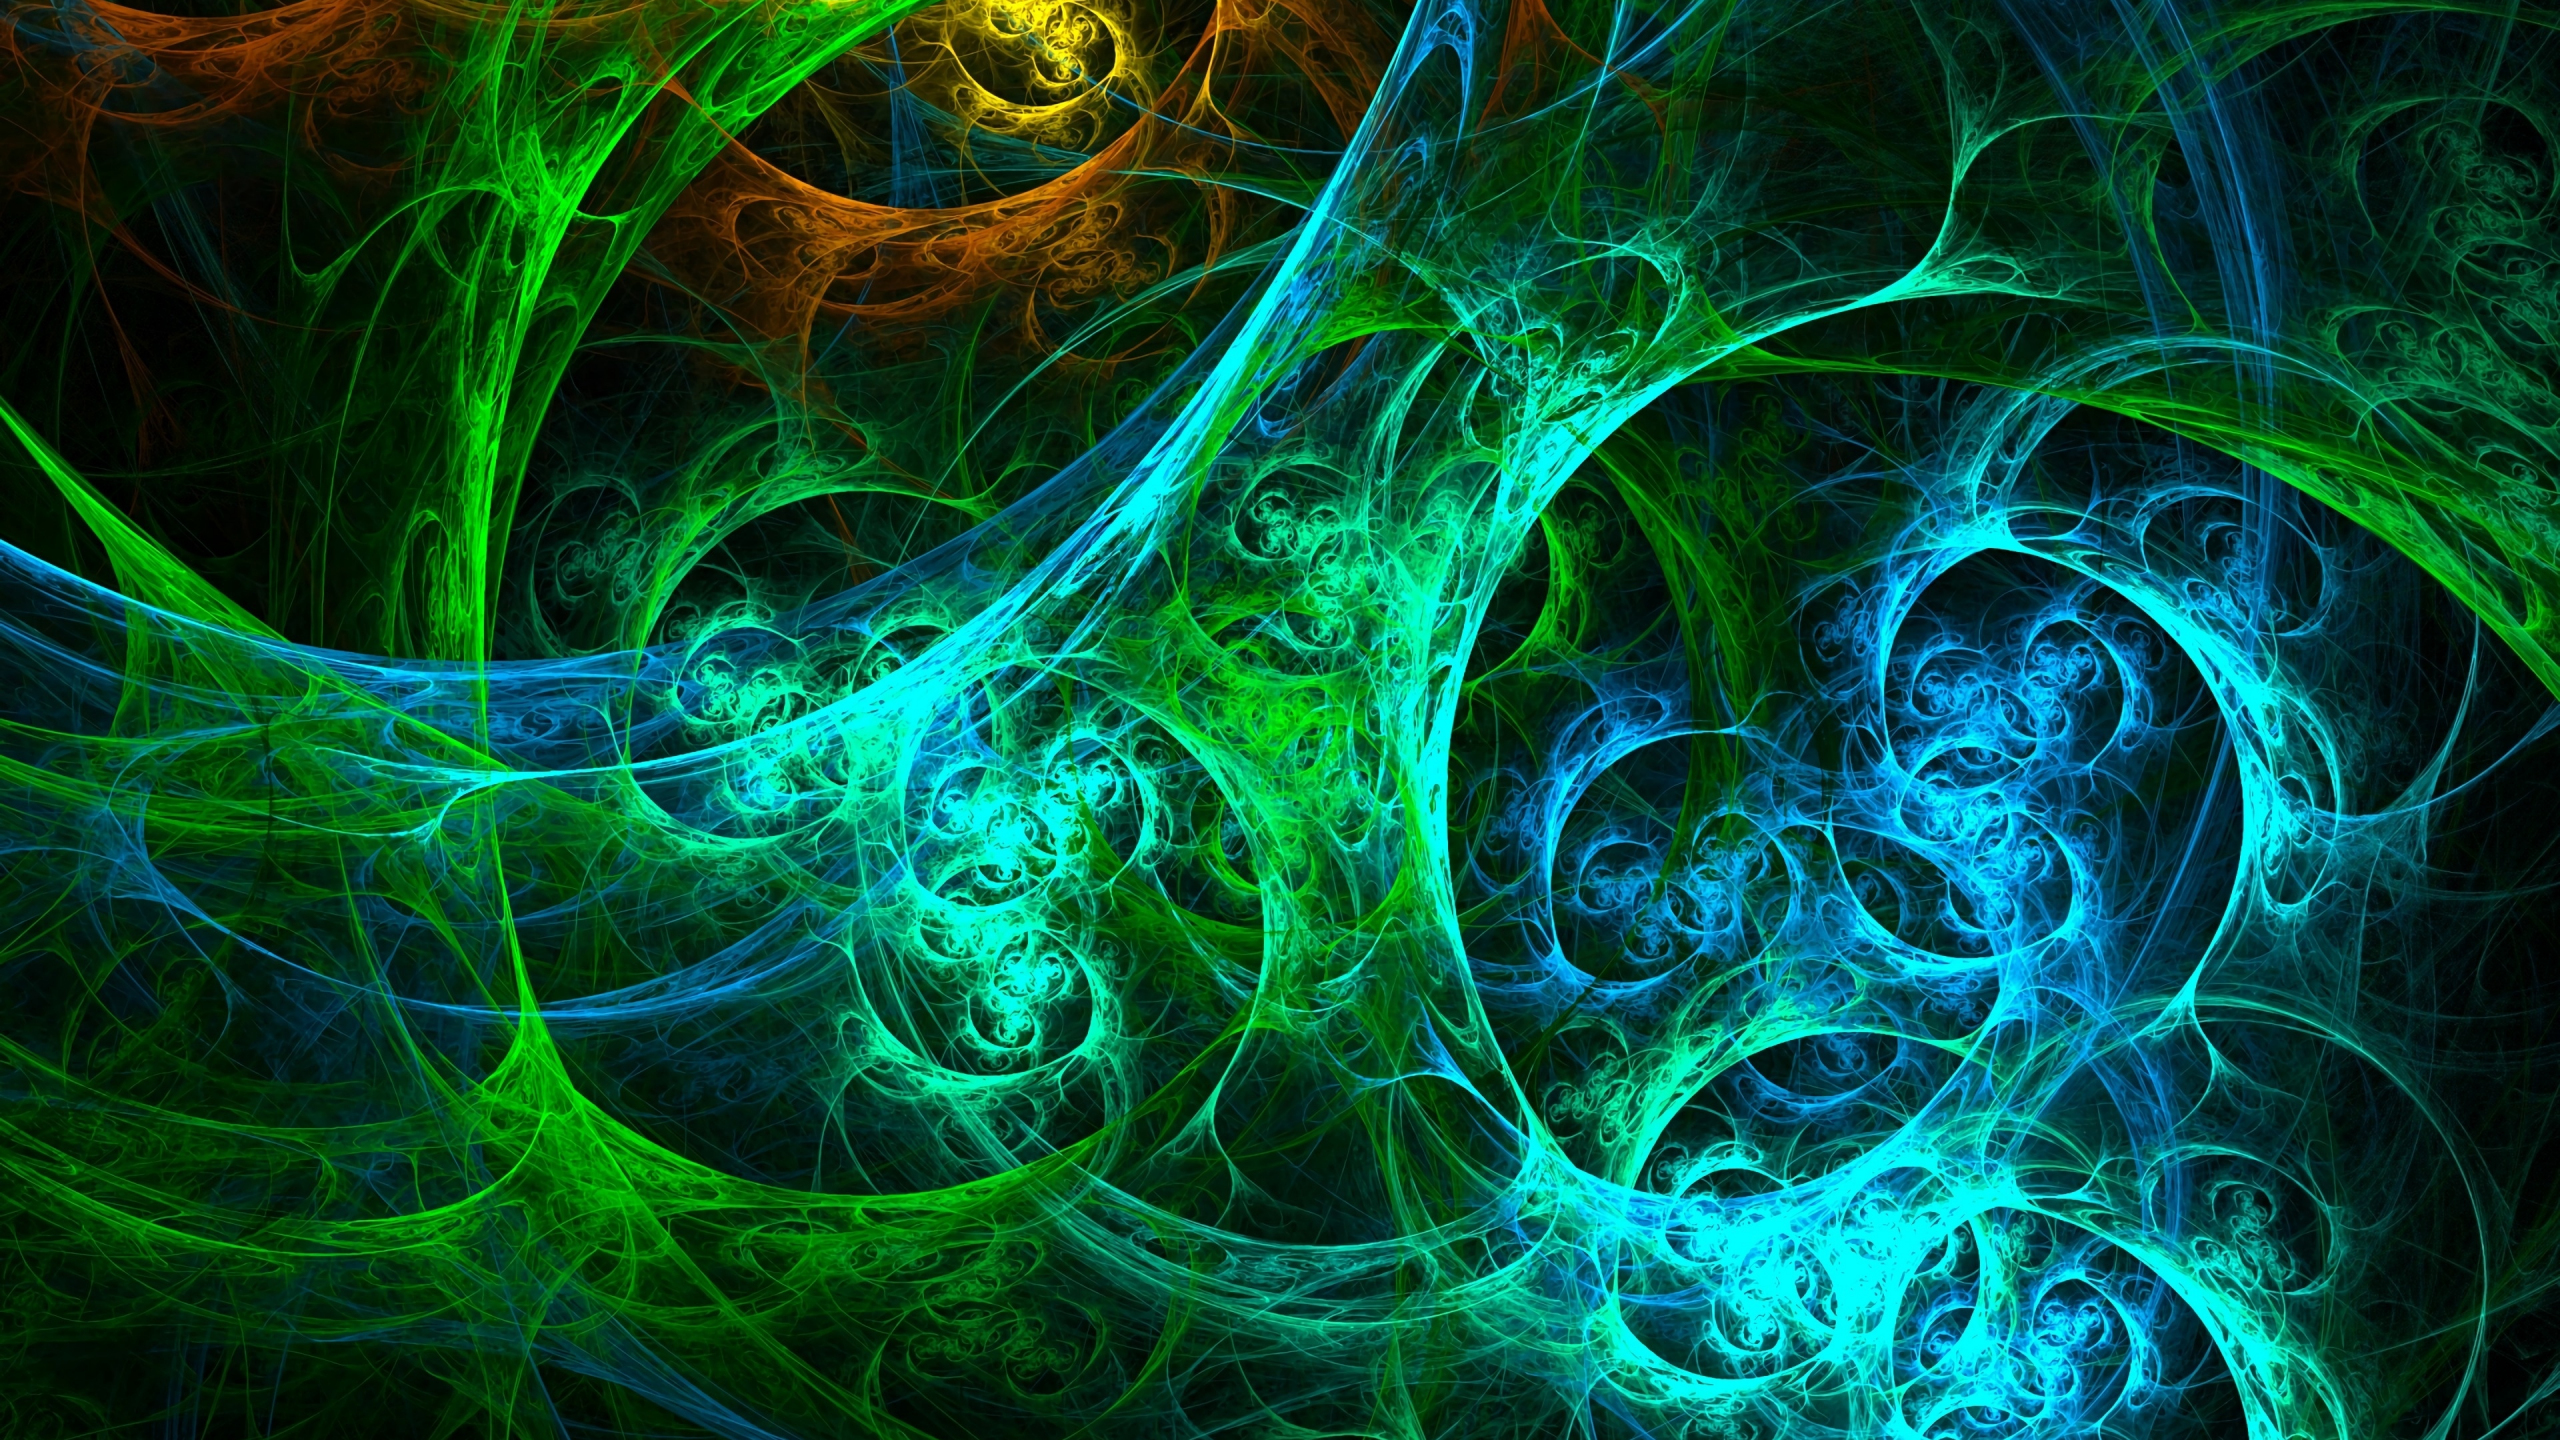 Download wallpaper 2560x1440 fractal, green glow, colorful, dual wide 16:9  2560x1440 hd background, 21975